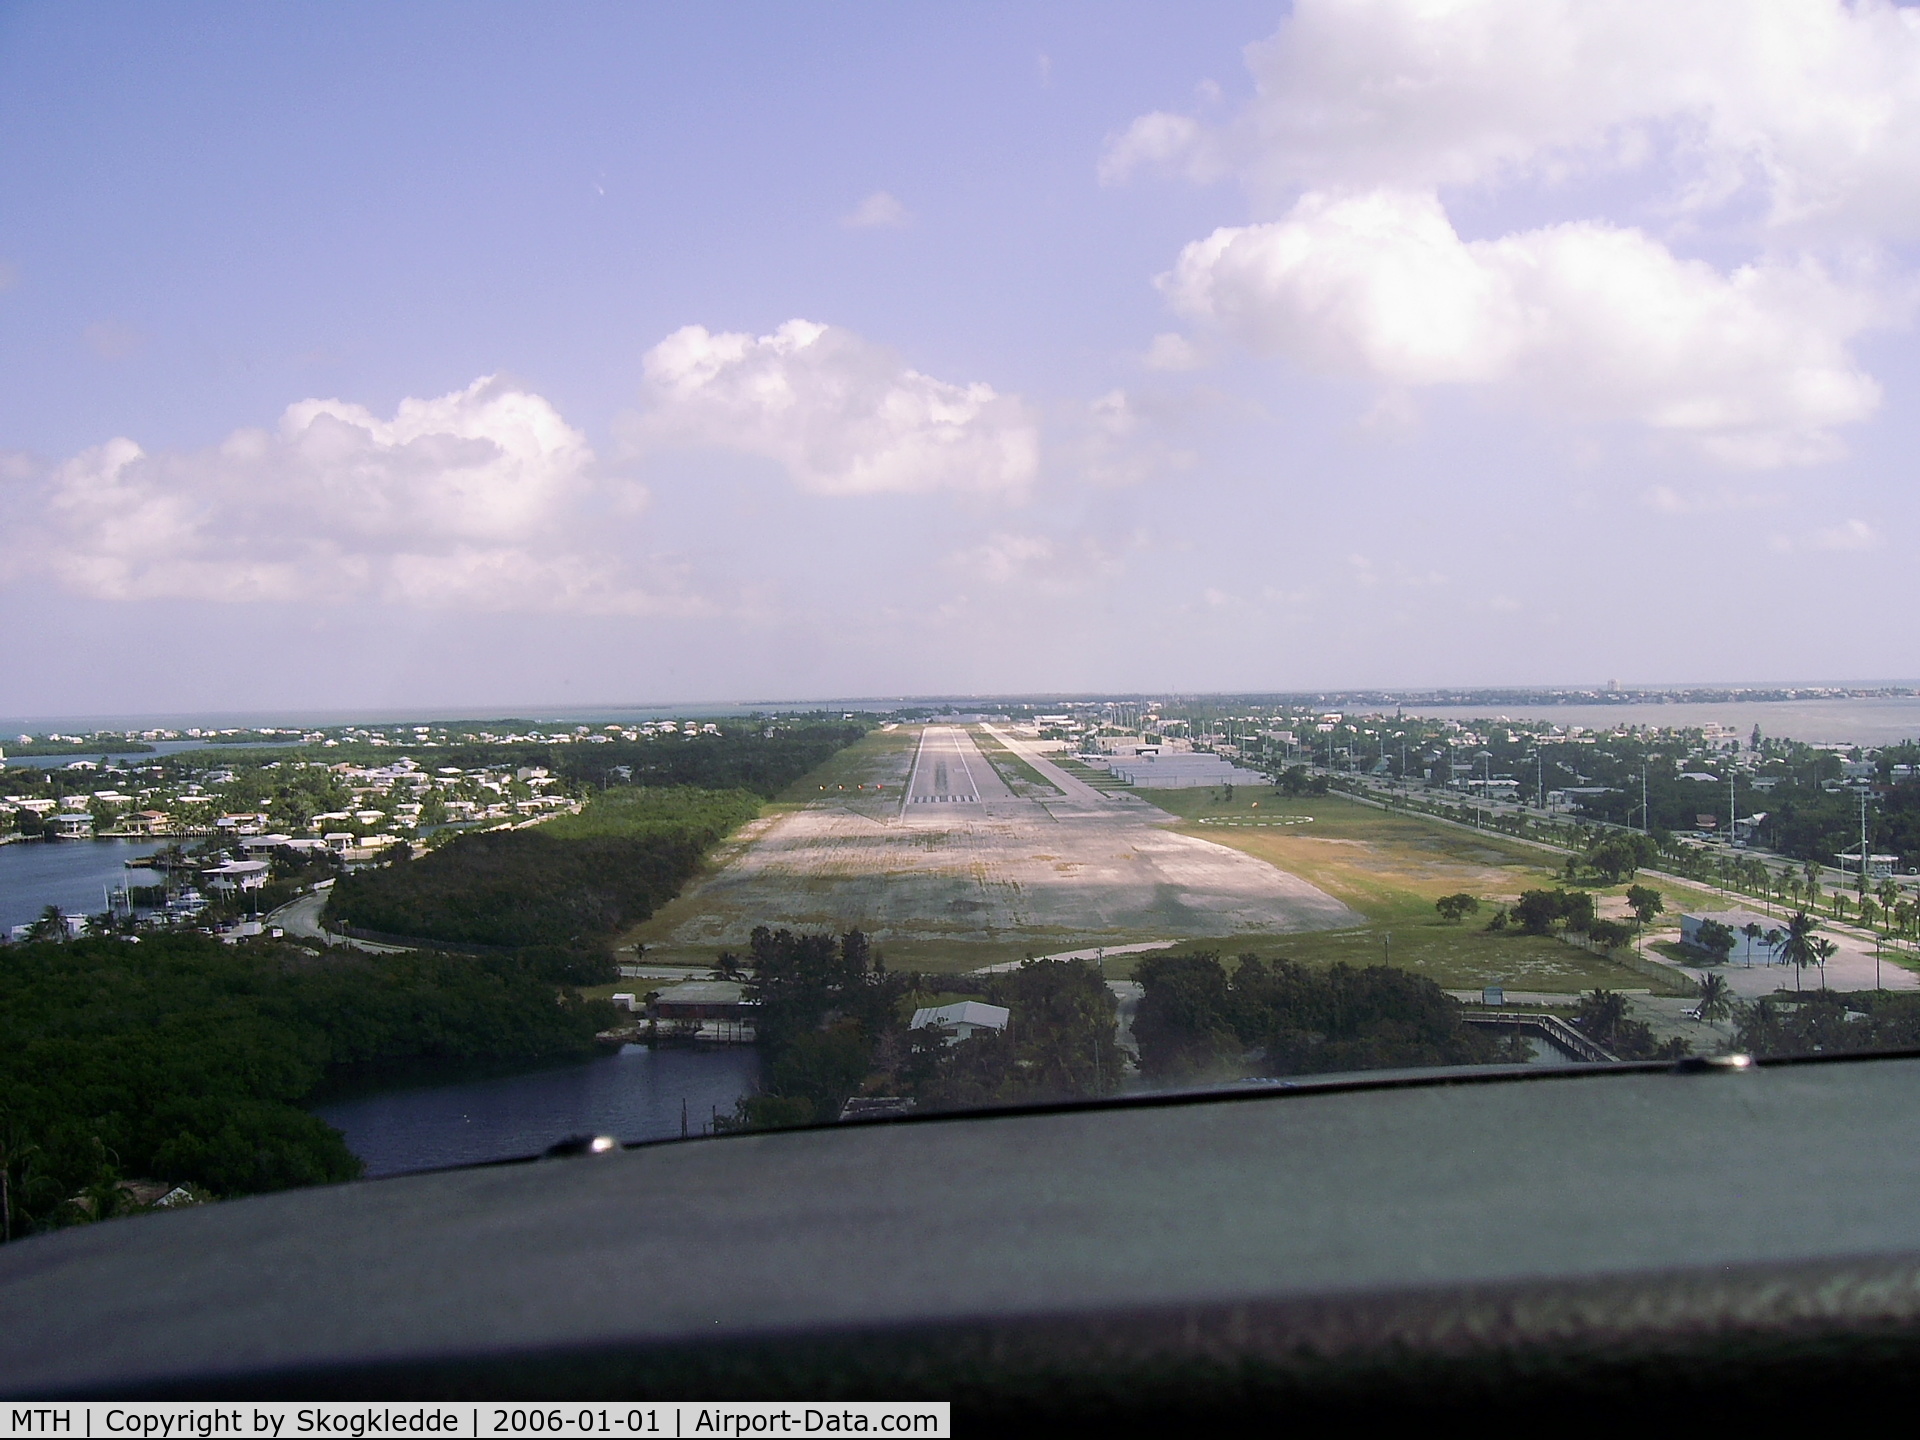 The Florida Keys Marathon Airport (MTH) - On approach at MTH